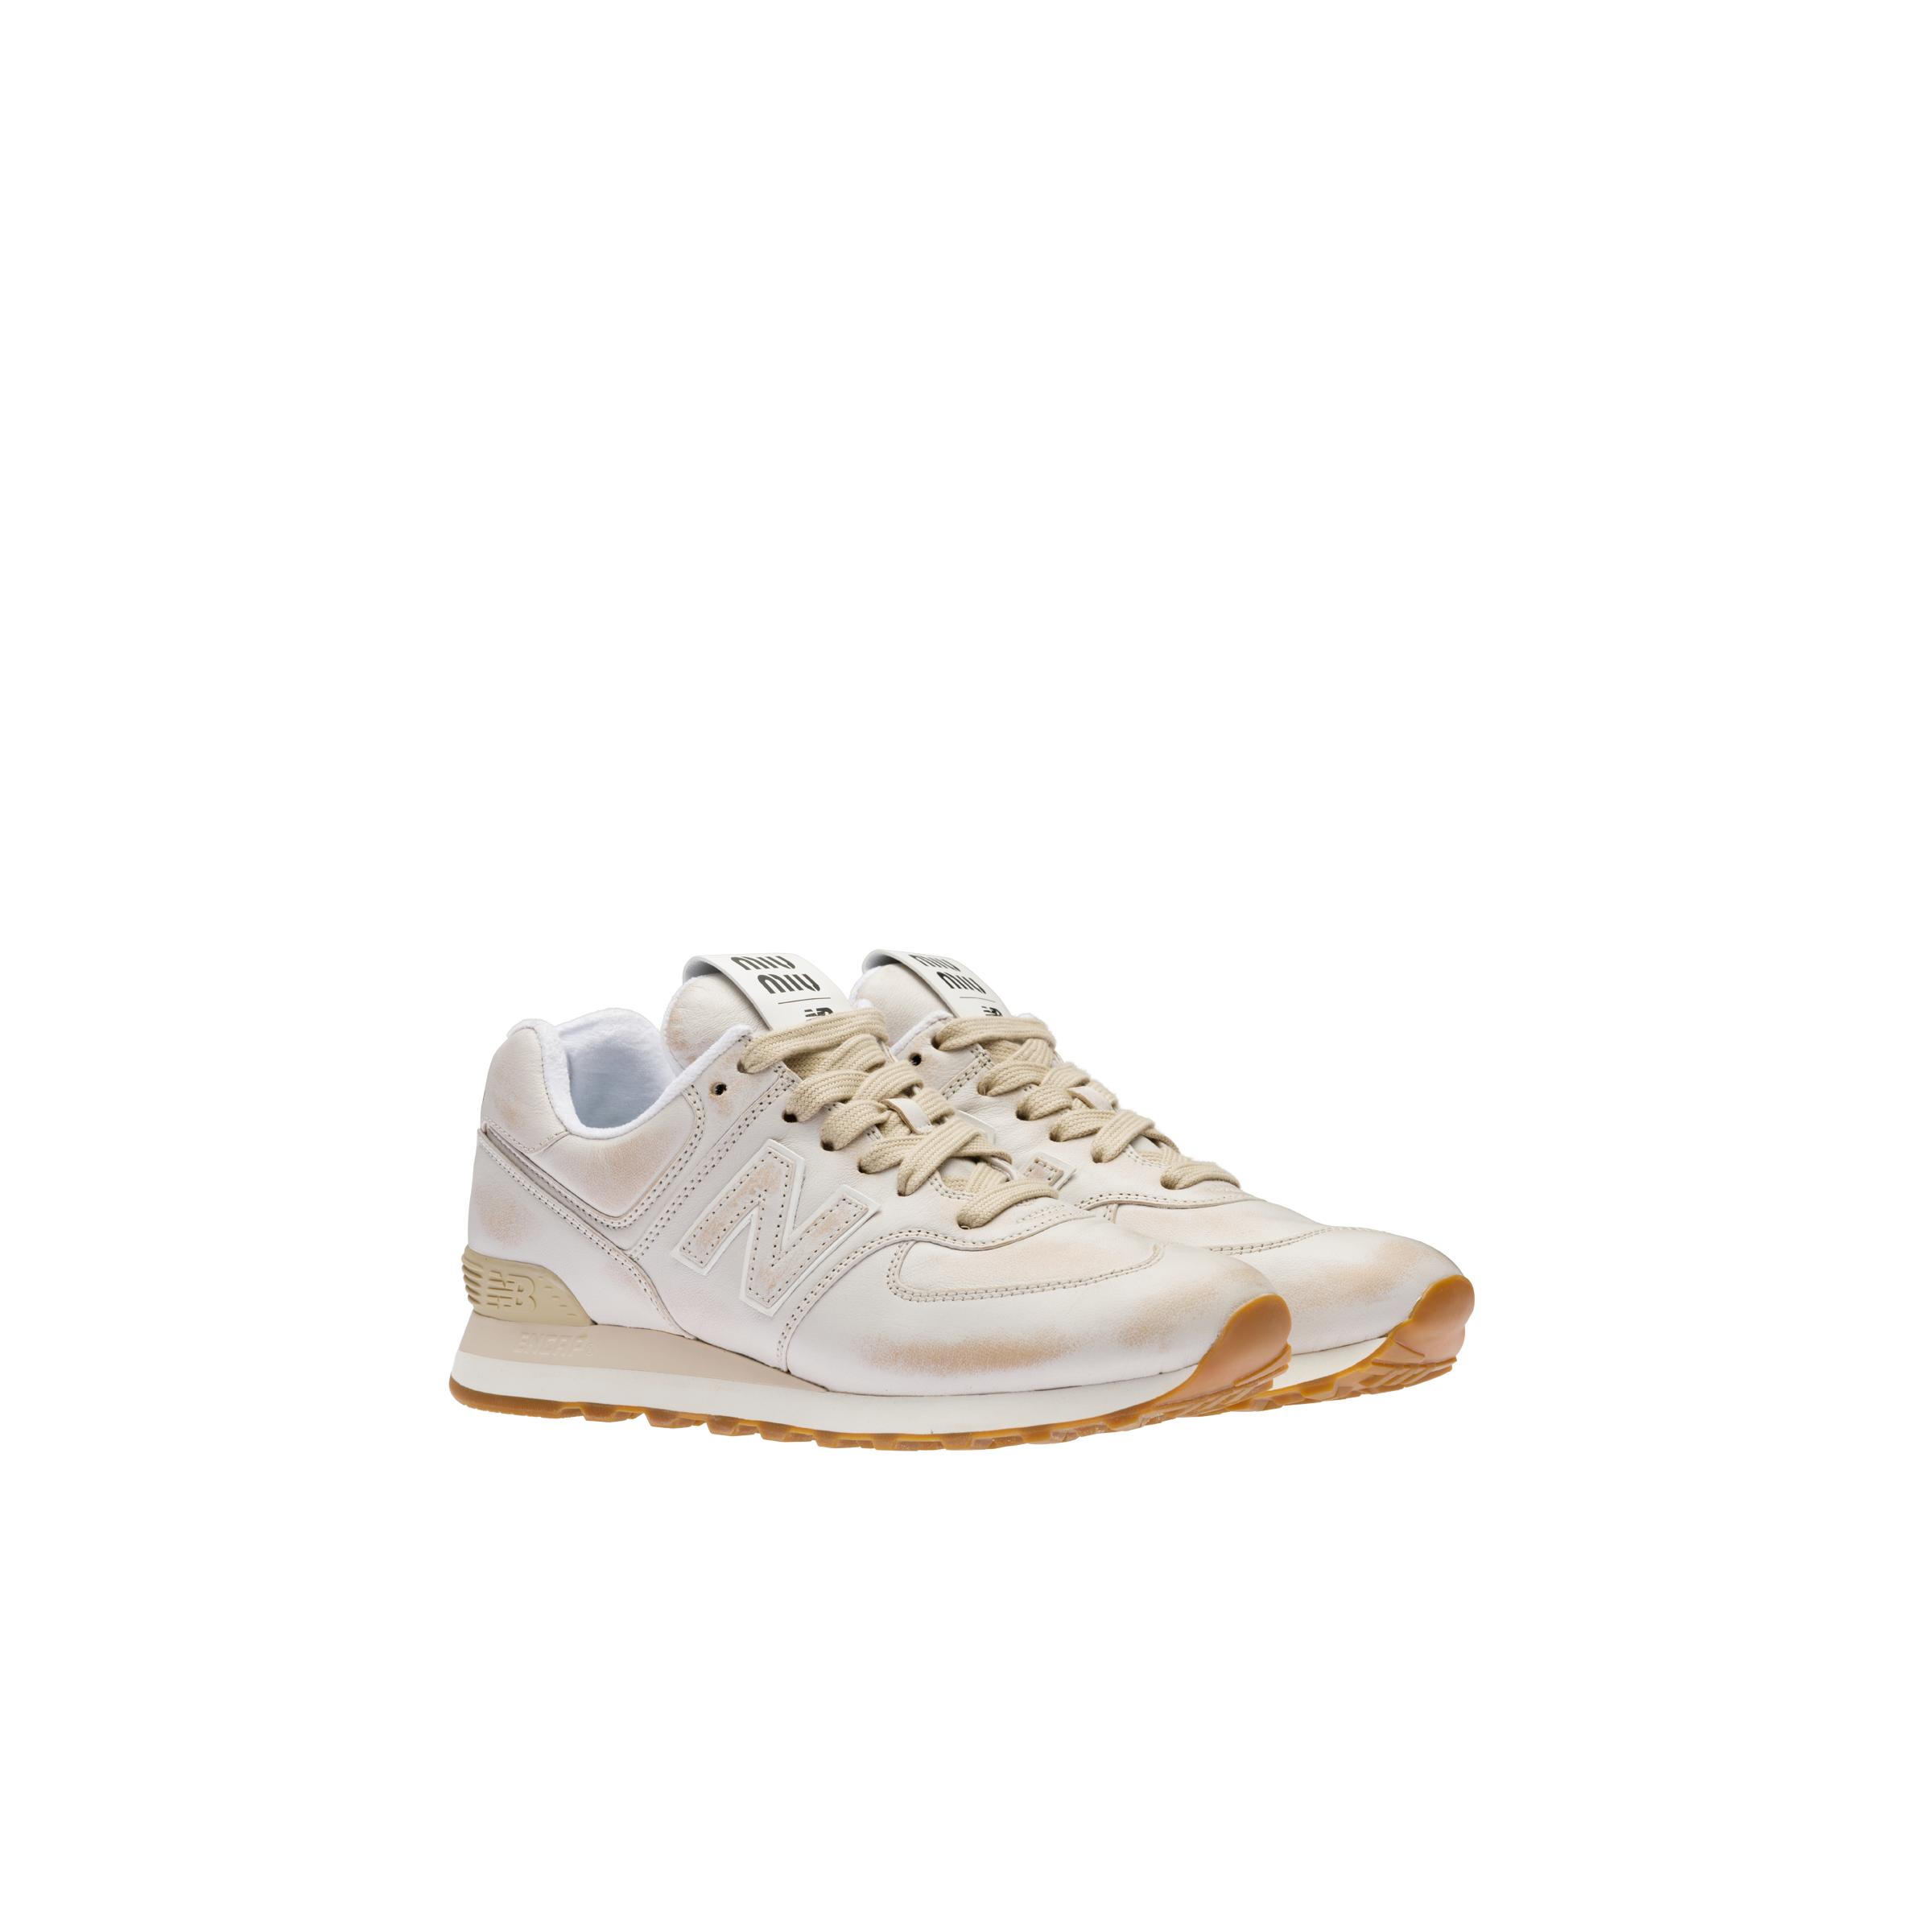 Miu Miu New Balance 574 X Vintage-effect Nappa Leather Sneakers in Natural  | Lyst